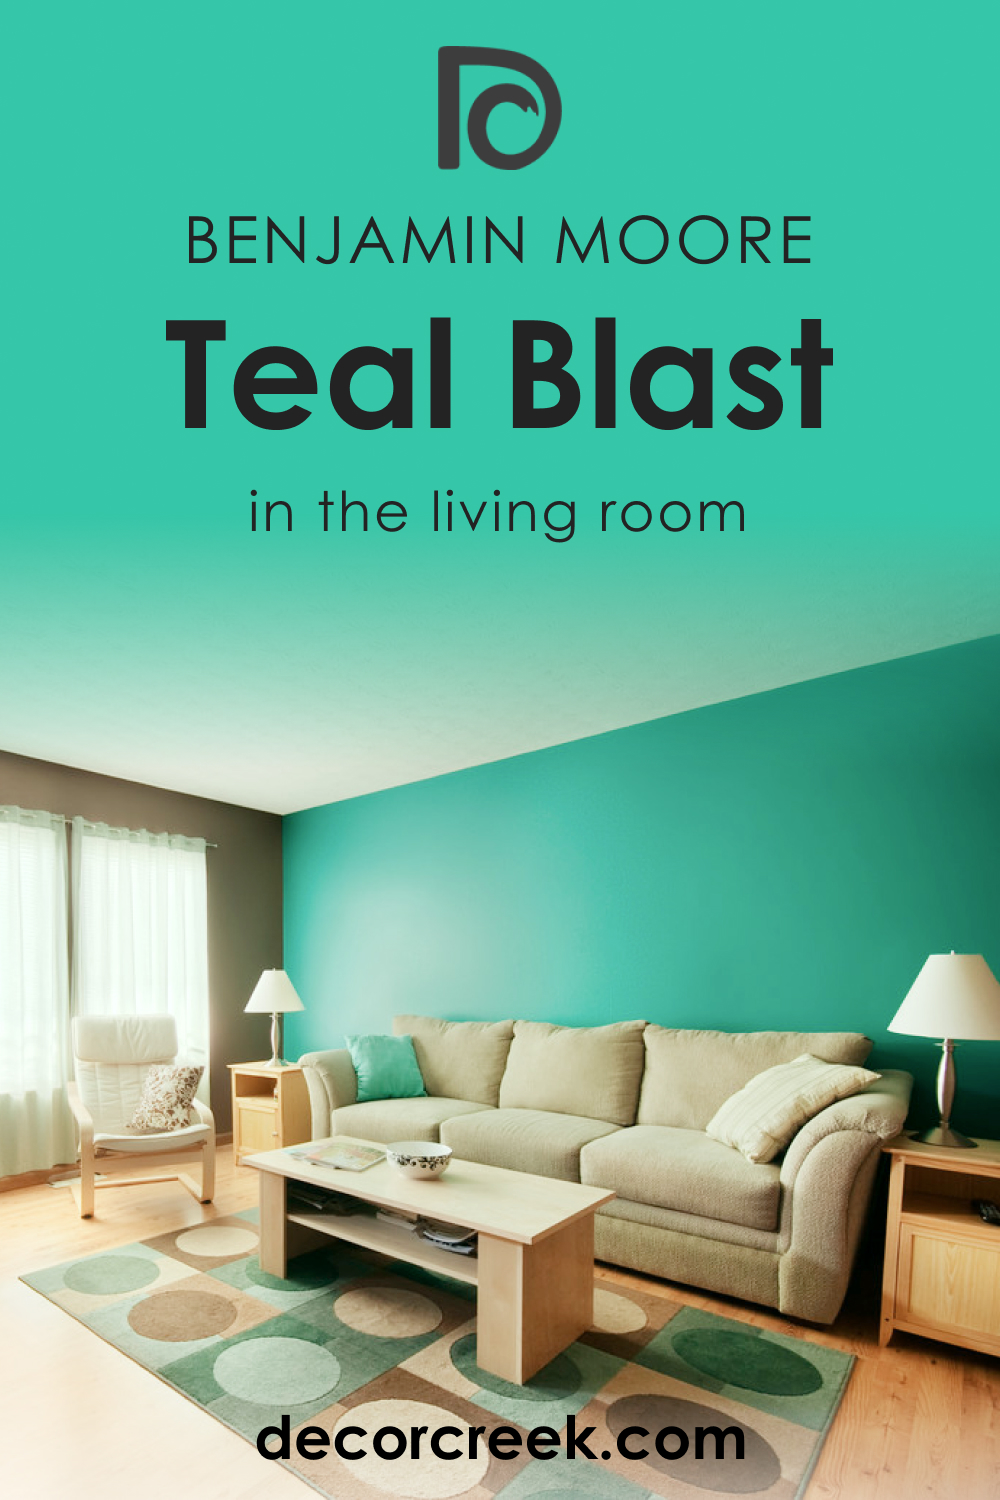 How to Use Teal Blast 2039-40 in the Living Room?